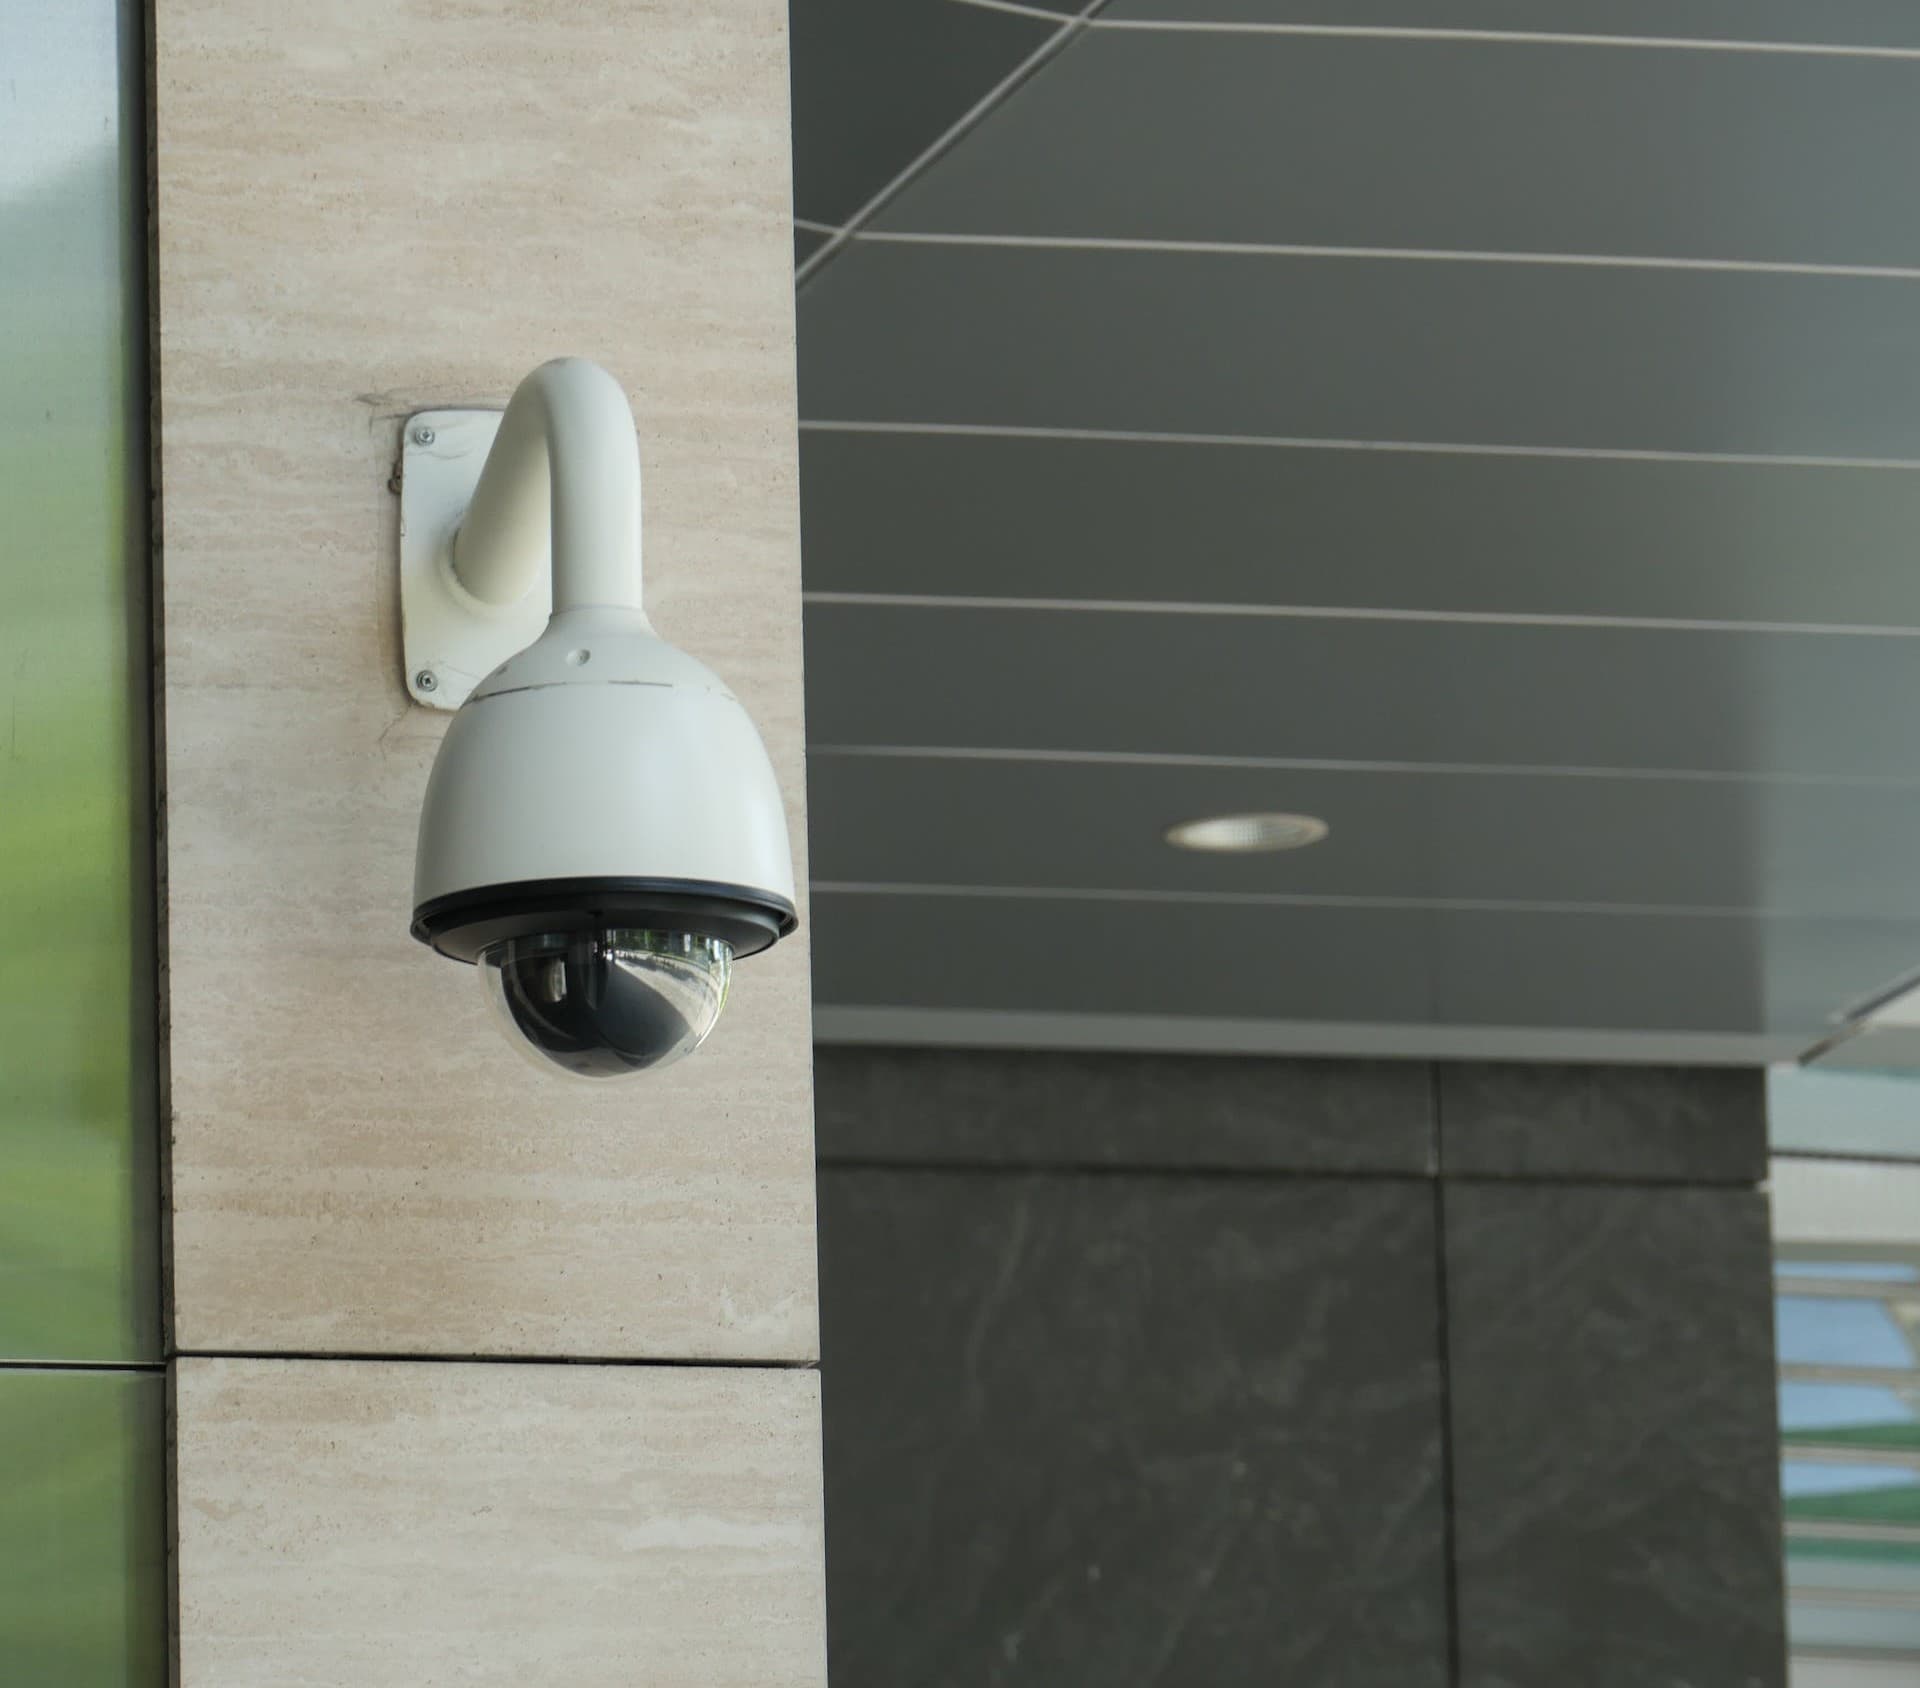 CCTV For Small Businesses A Cost-effective Solution